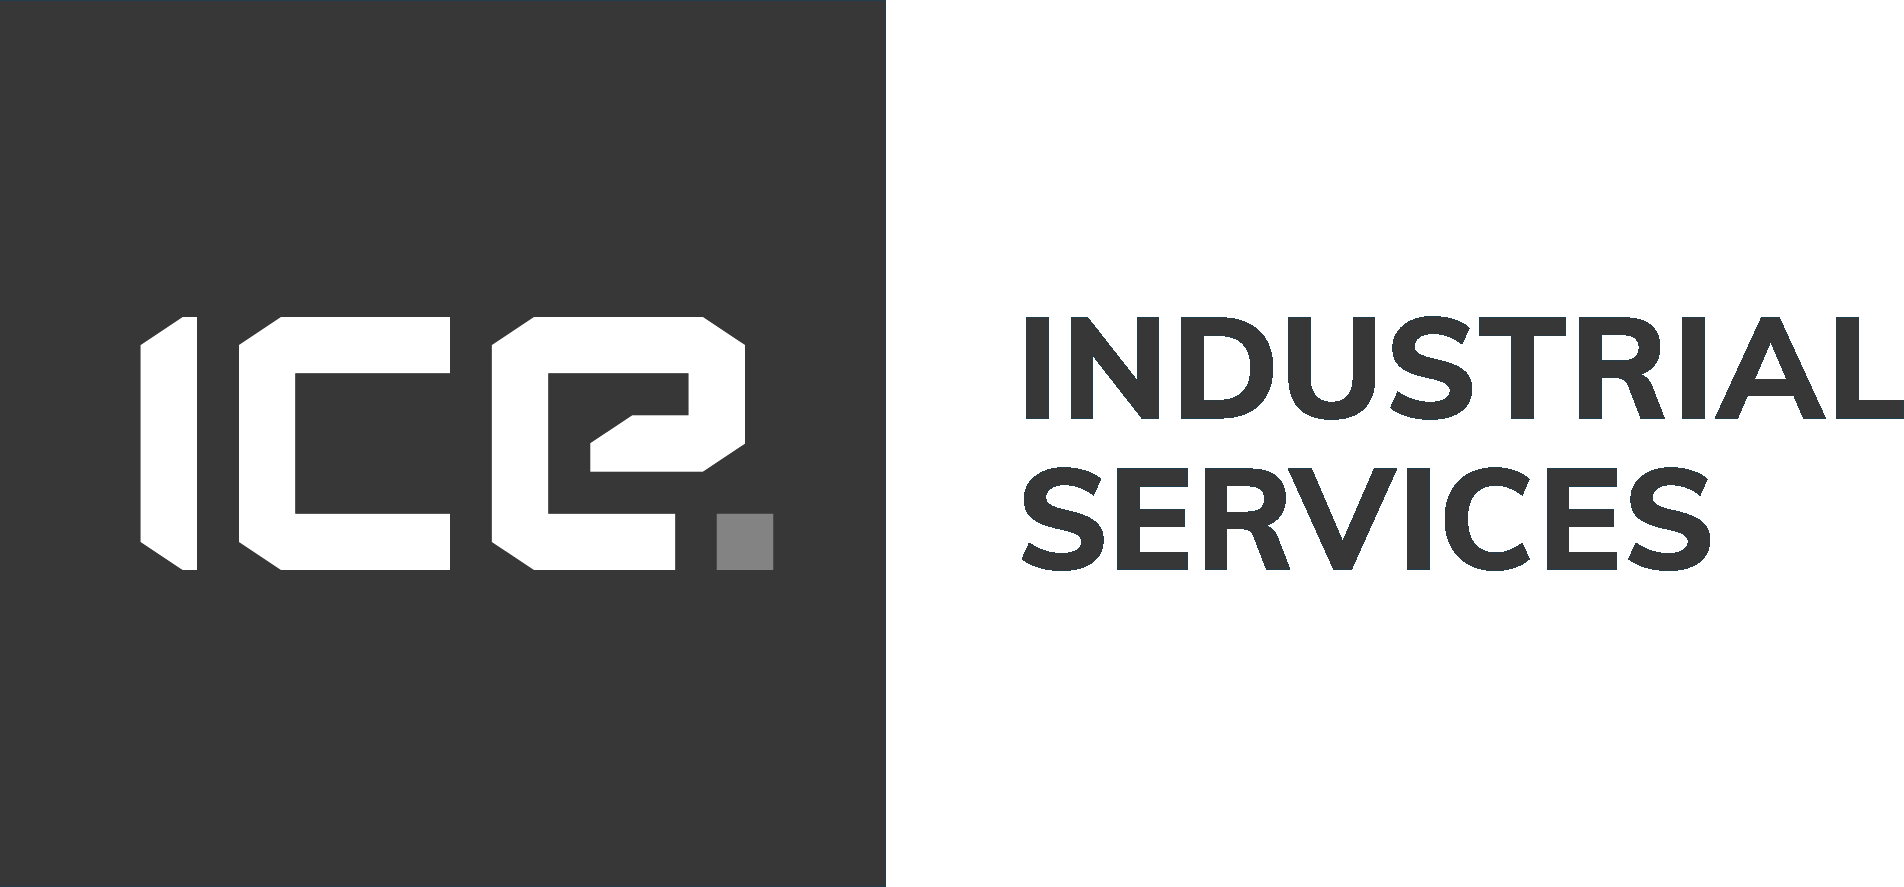 ICE Industrial Services